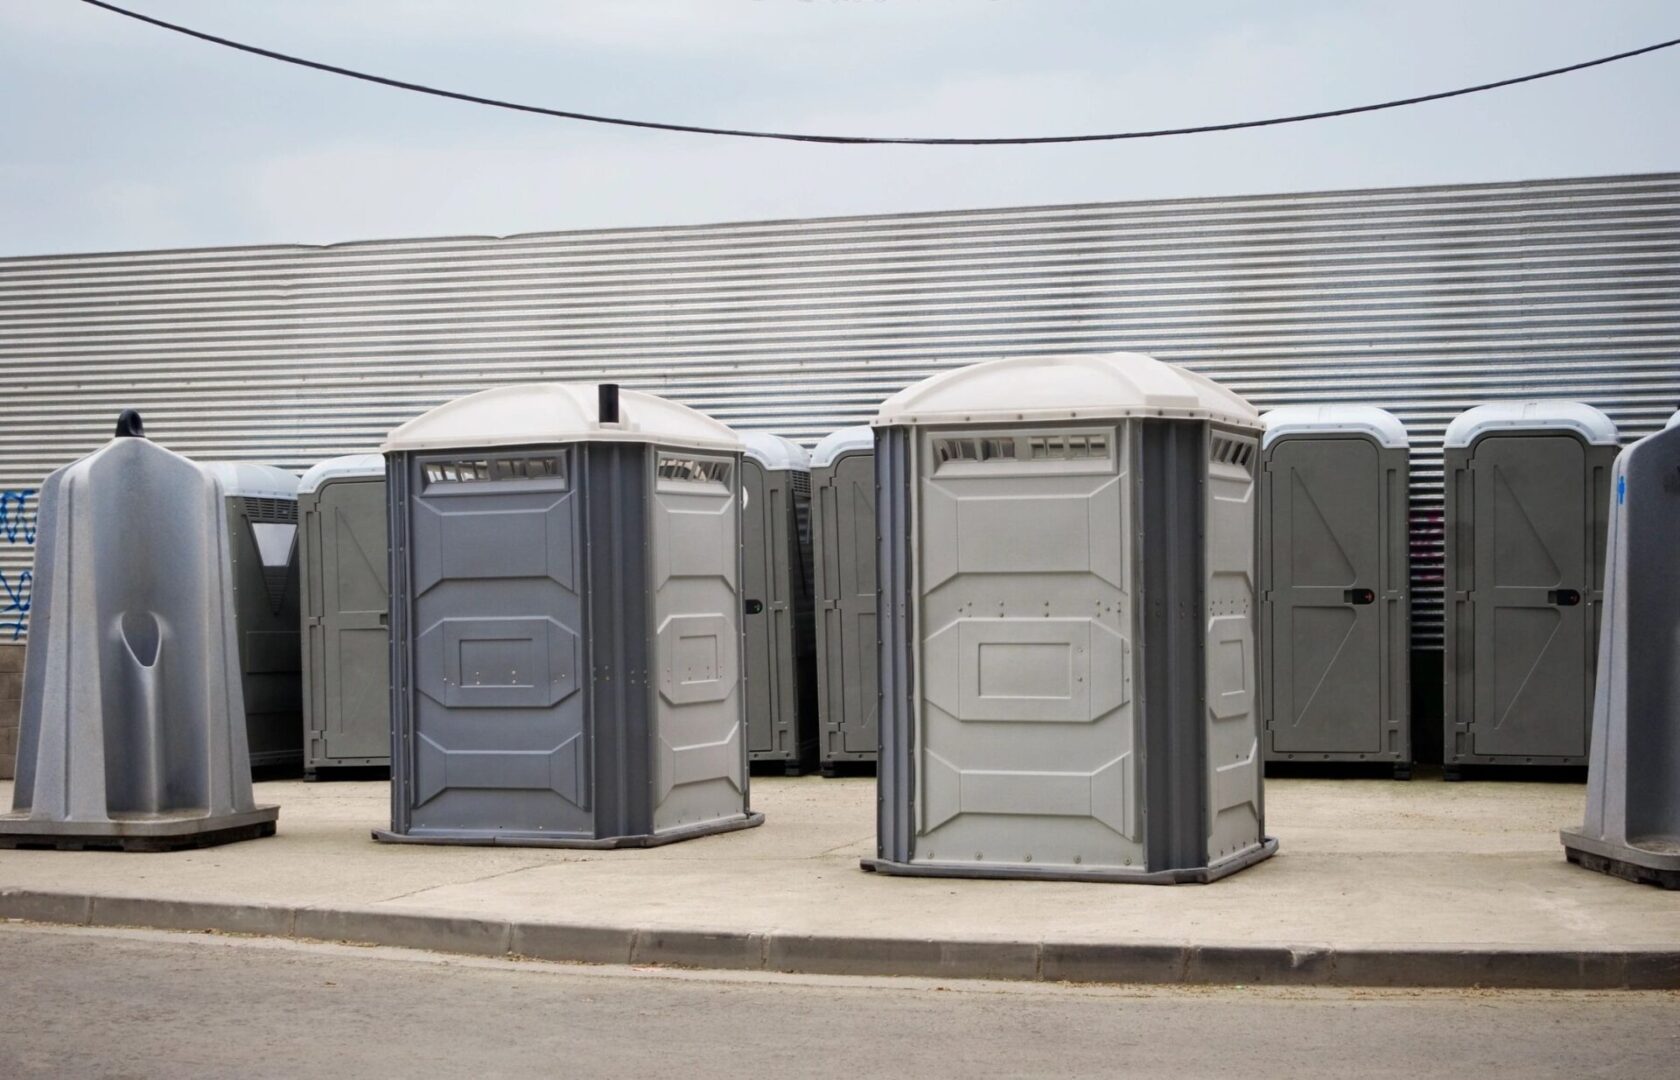 A row of portable toilets and a hand washing station in a parking area with a curved metal roof in the background.